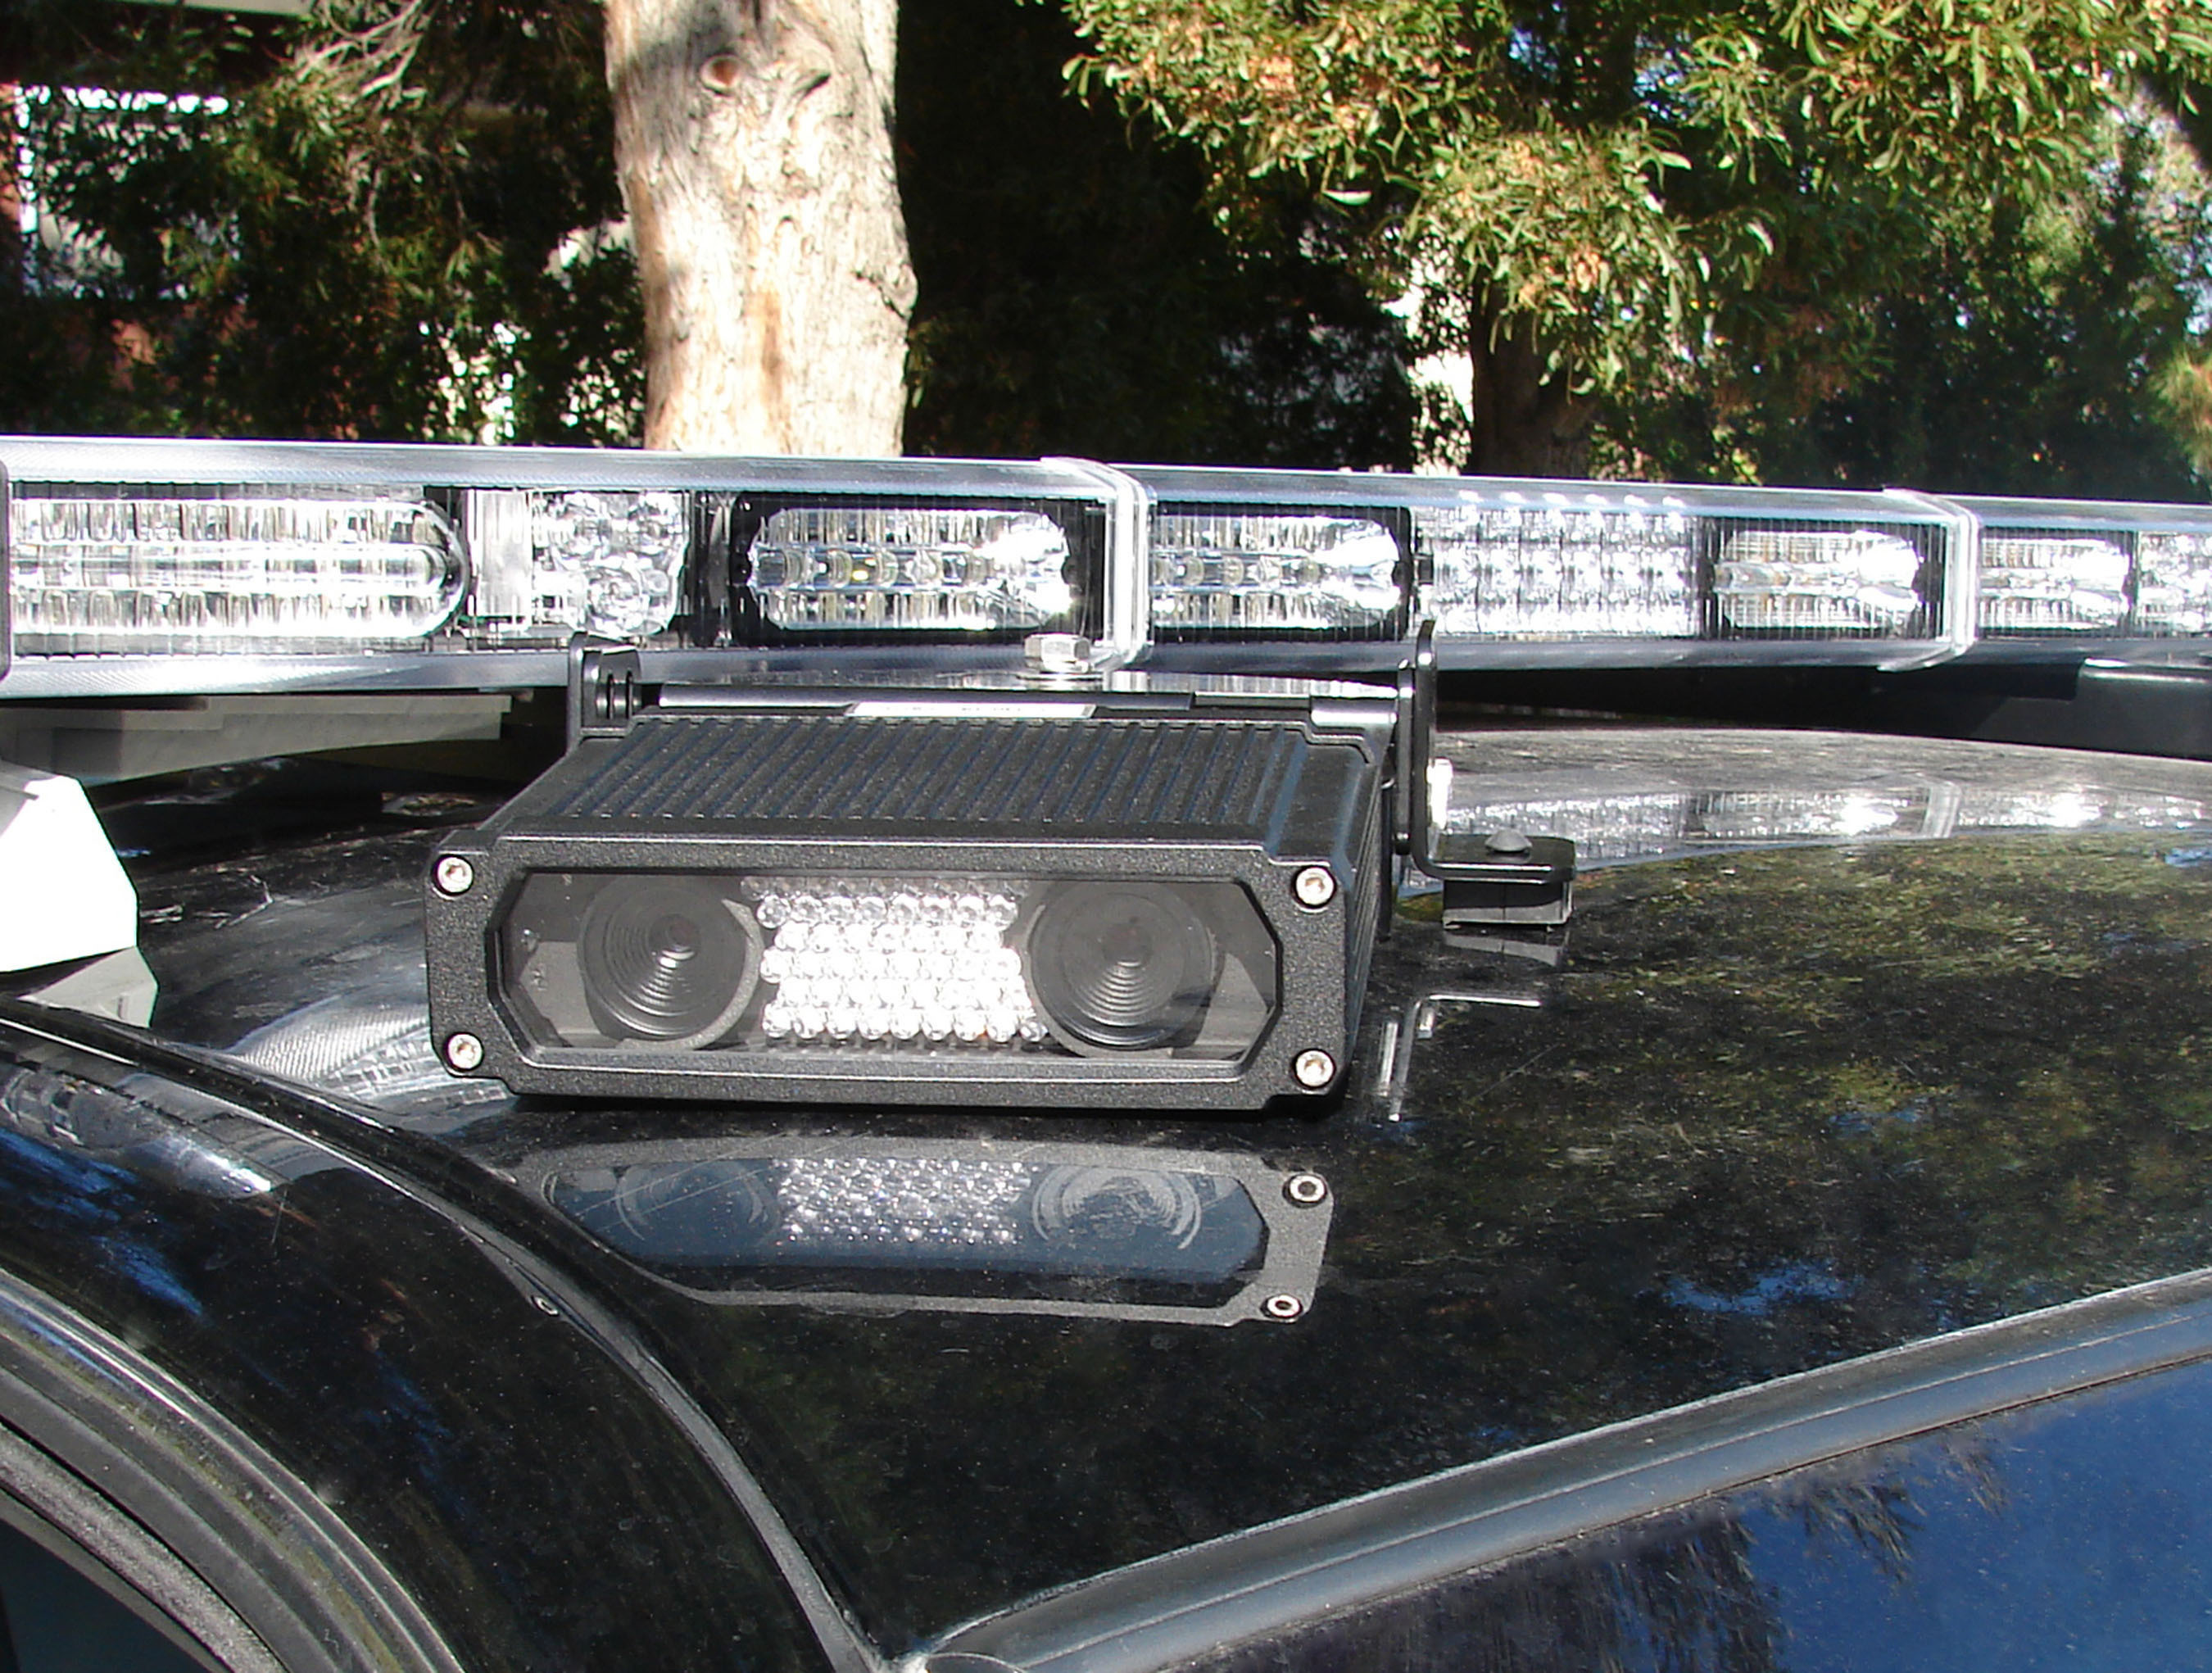 License Plate Recognition Camera from Vigilant Solutions; Protecting Officers, Families and Communities.